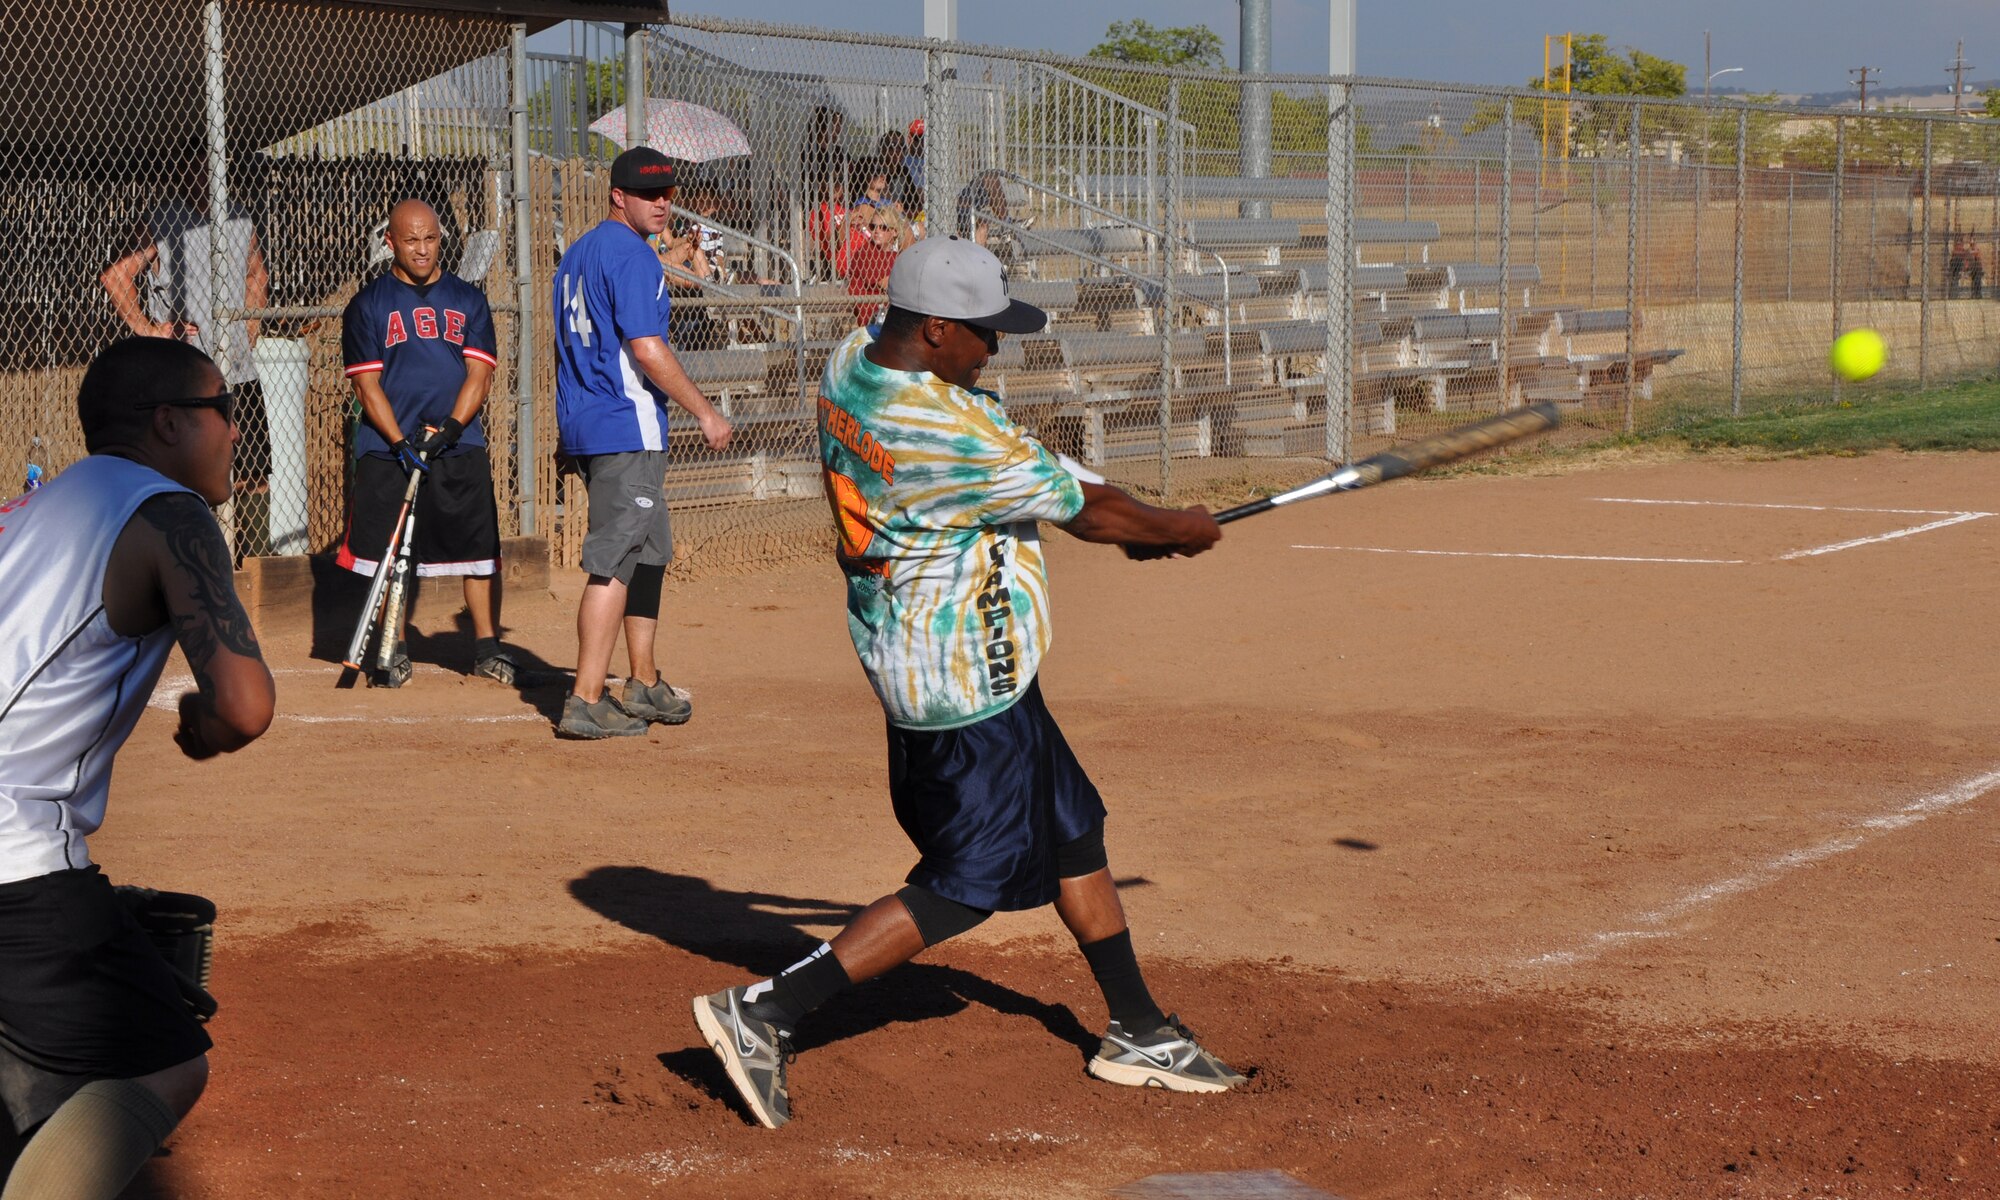 A member of the 9th Maintenance Squadron connects with a softball during Beale’s Intramural Softball Championships at Beale Air Force Base, Calif., Aug. 16, 2012. The 9th MXS defeated the 9th Munitions Squadron with a 10-9 victory. (U.S Air Force photo by Staff Sgt. Robert M. Trujillo)     